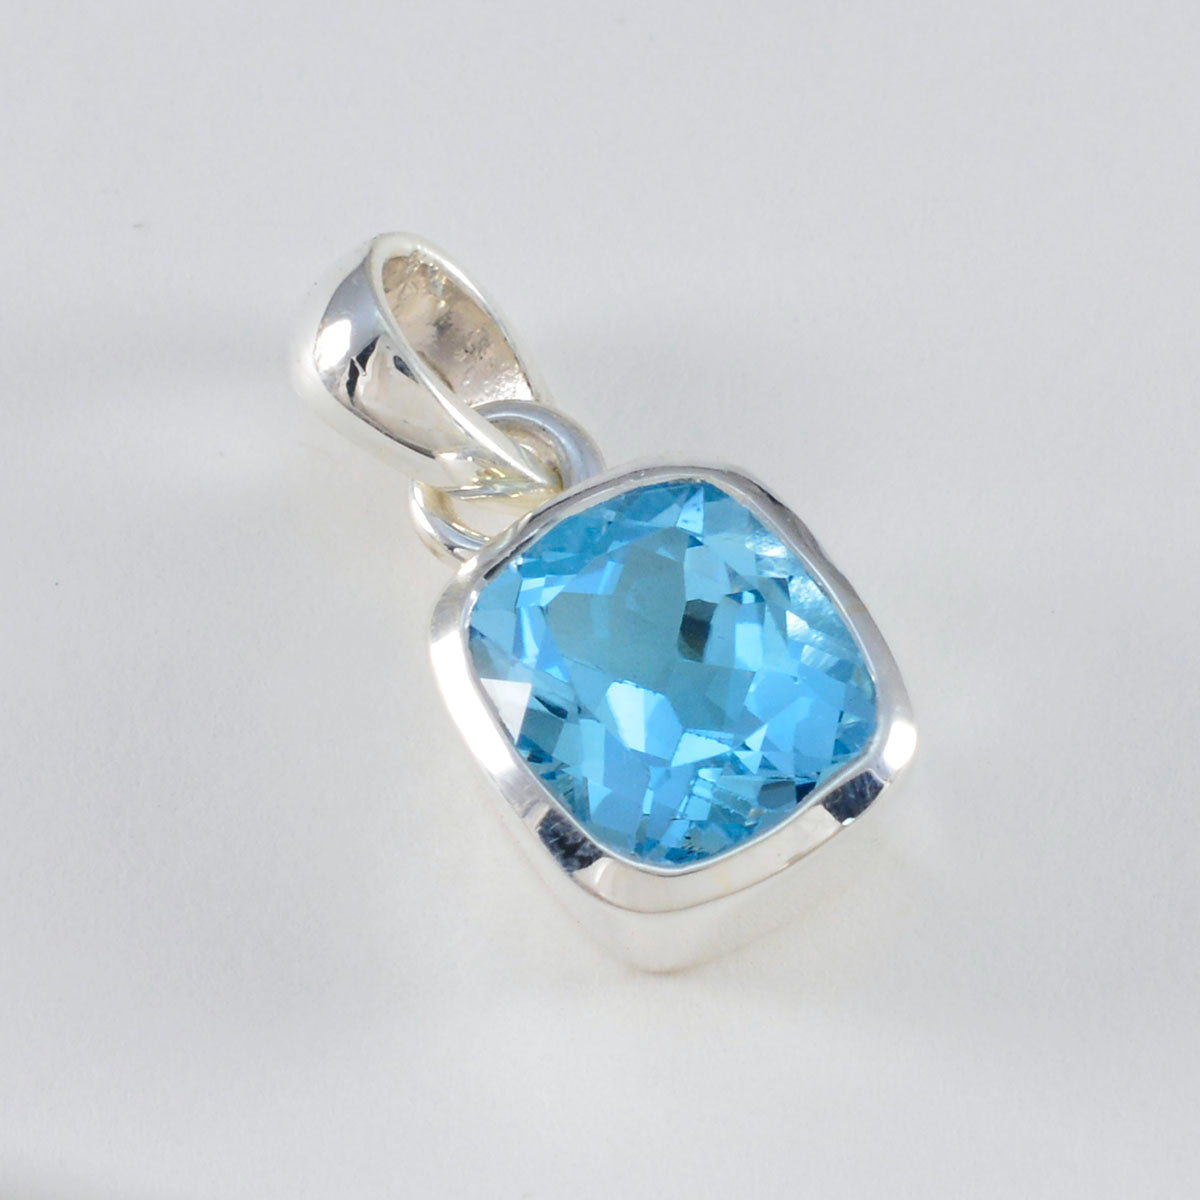 Riyo Knockout Gems Octagon Faceted Blue Blue Topaz Silver Pendant Gift For Sister